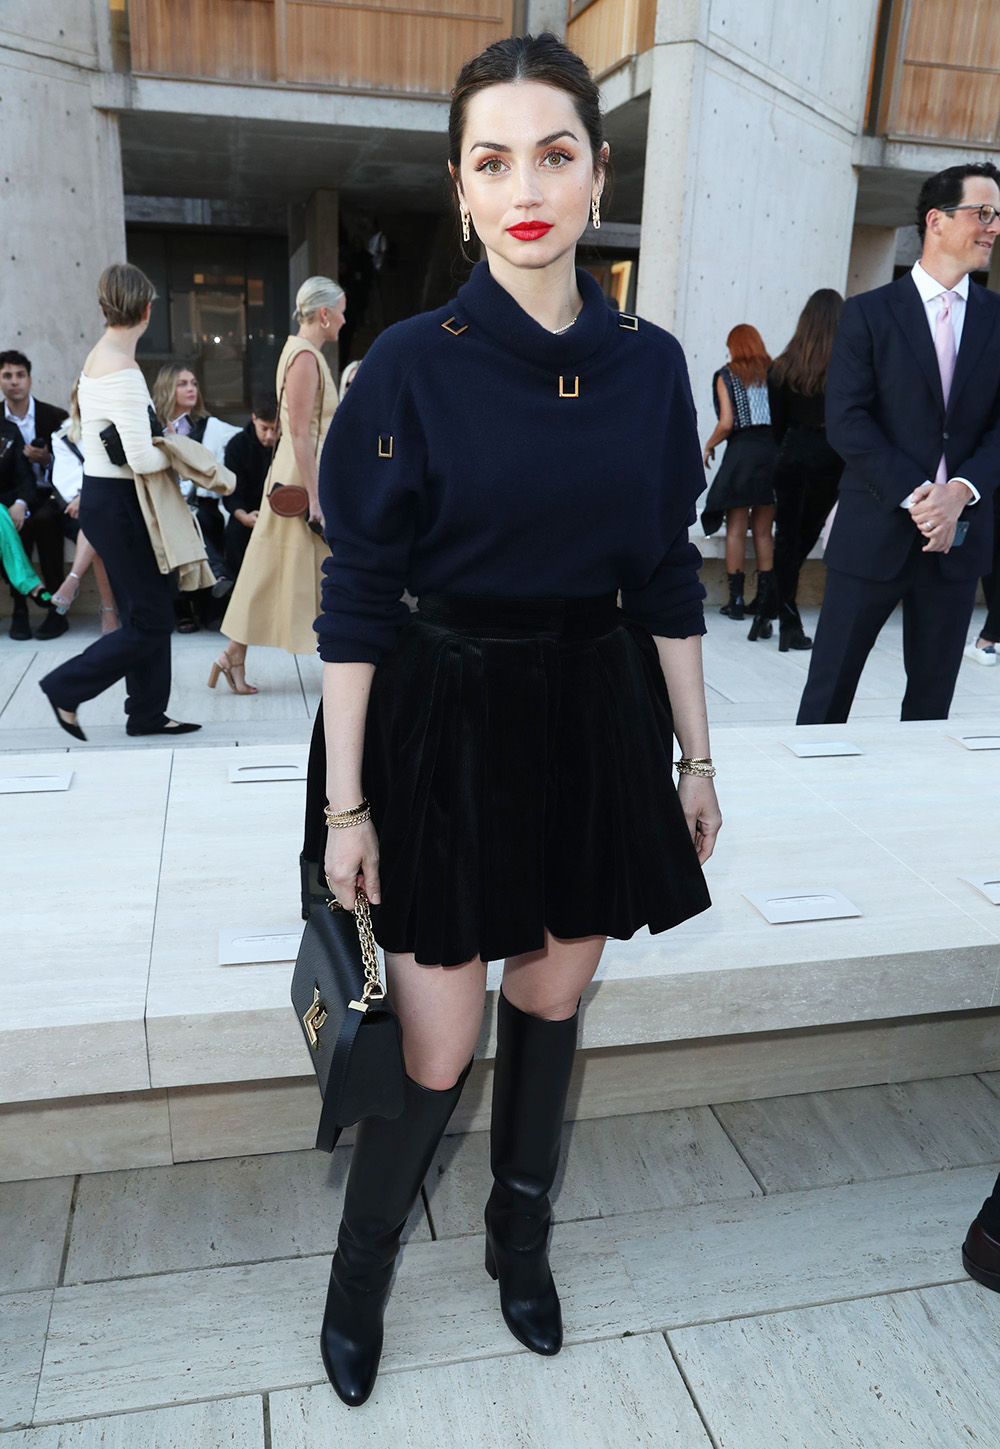 Ana de Armas is Preppy-Chic in Sweater, Velvet Mini Skirt & Knee-High Boots  at Louis Vuitton Cruise 2023 Show